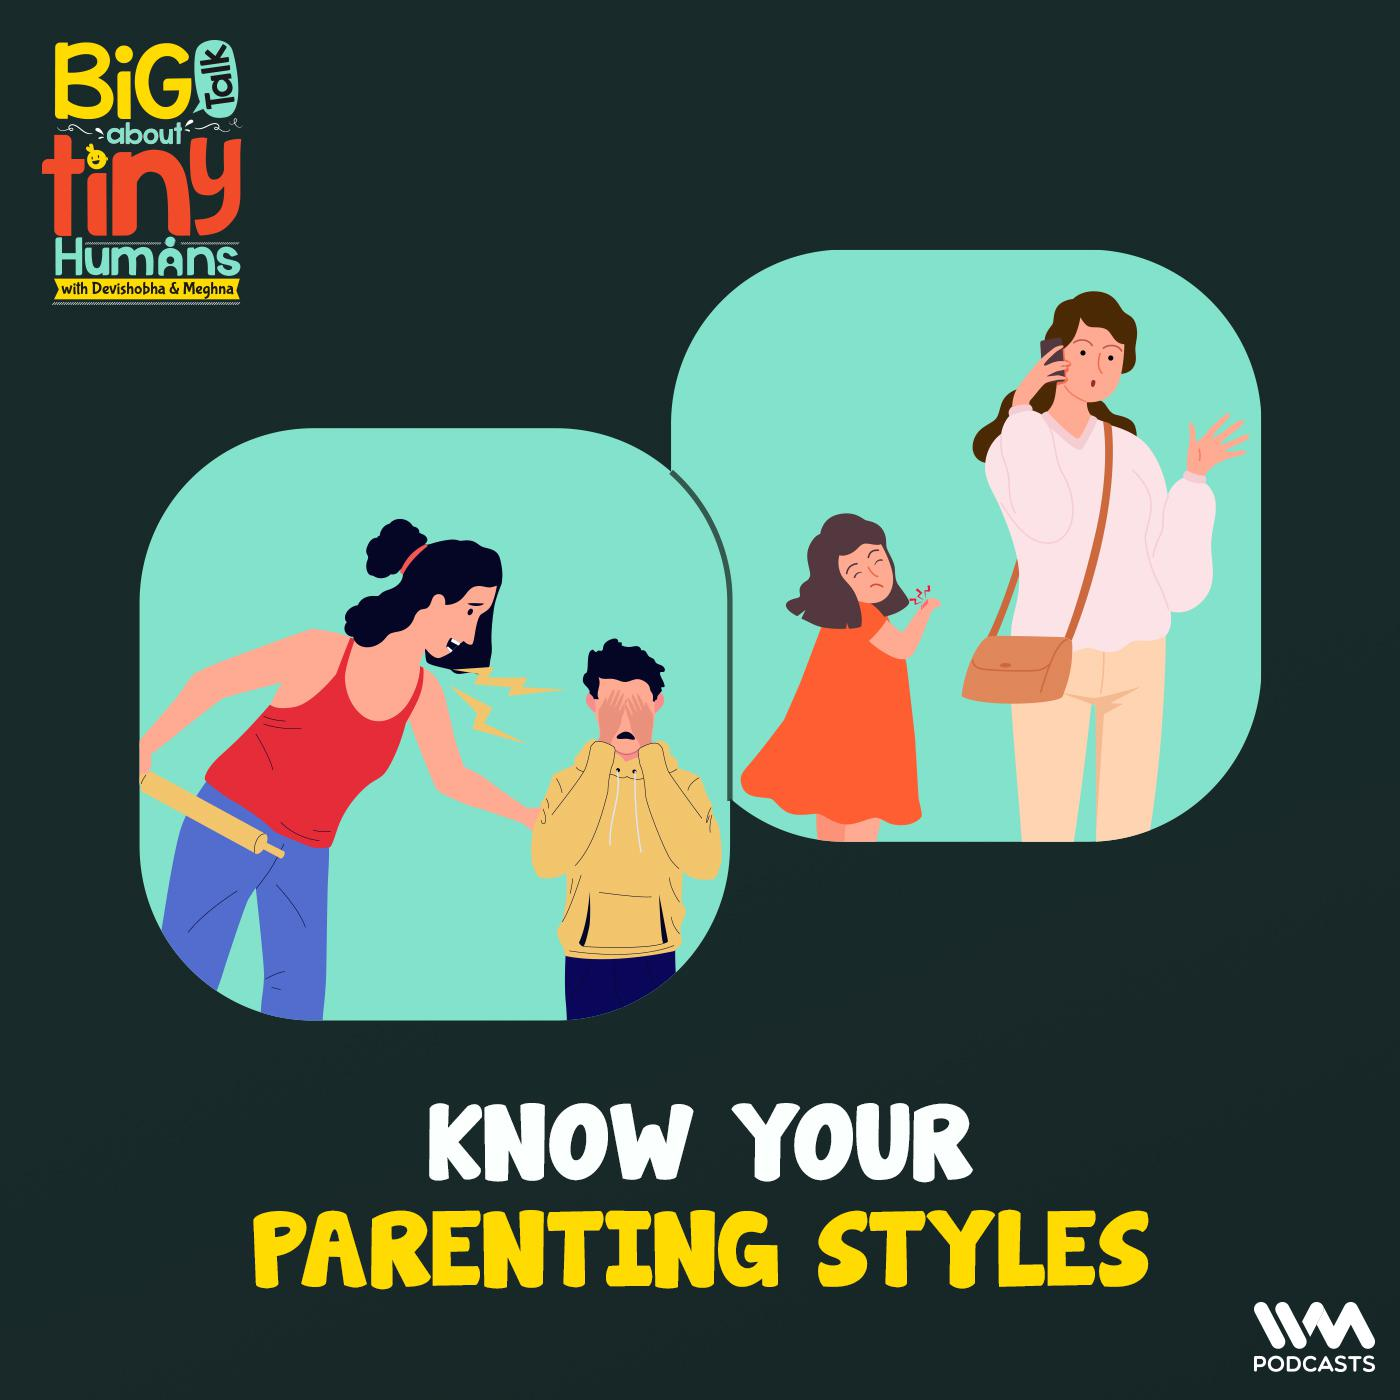 Know your parenting styles